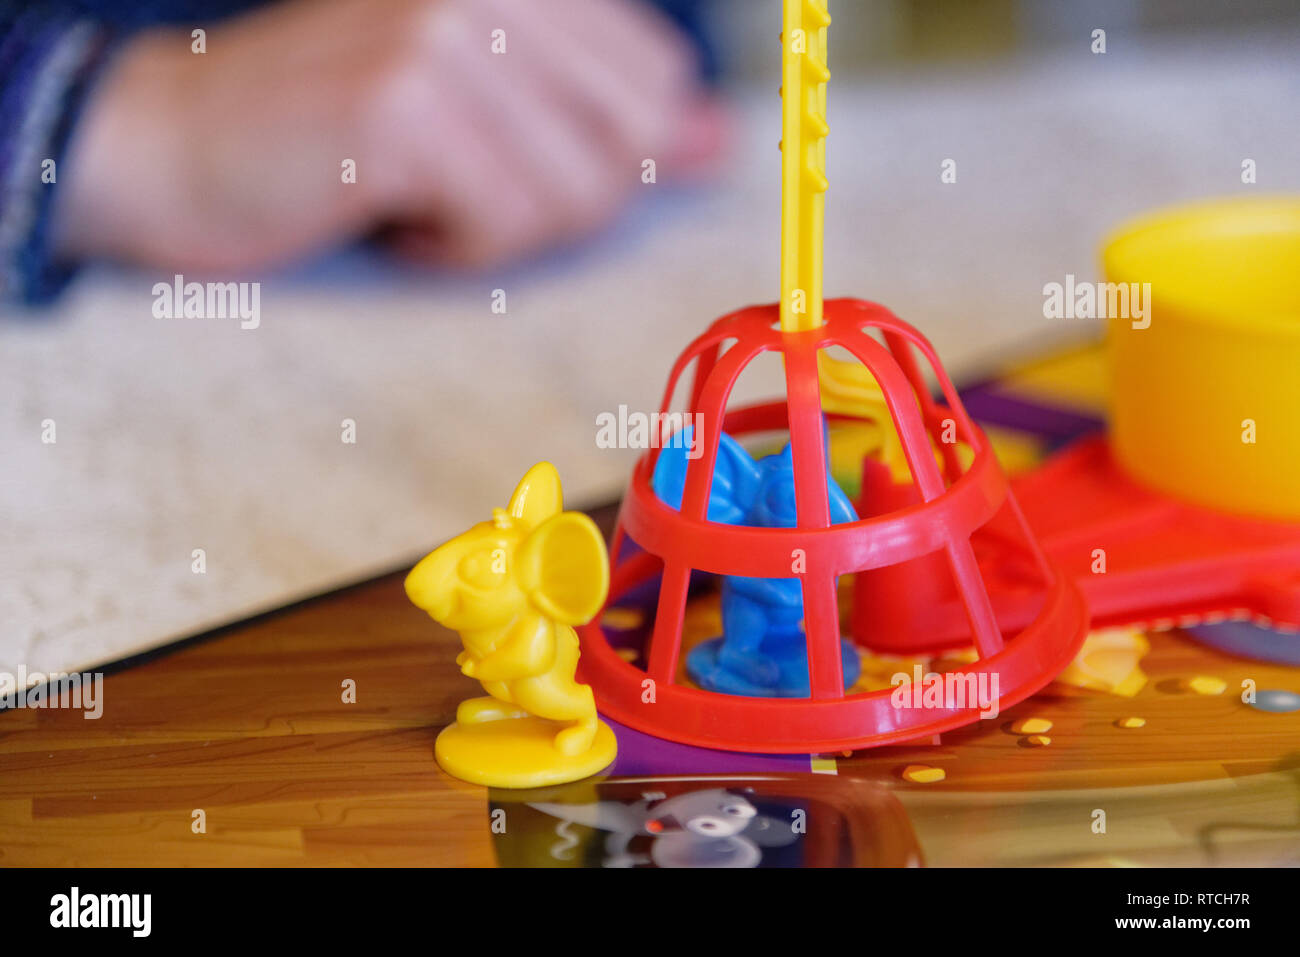 https://c8.alamy.com/comp/RTCH7R/trapped-mouse-playing-piece-in-the-mouse-trap-board-game-RTCH7R.jpg